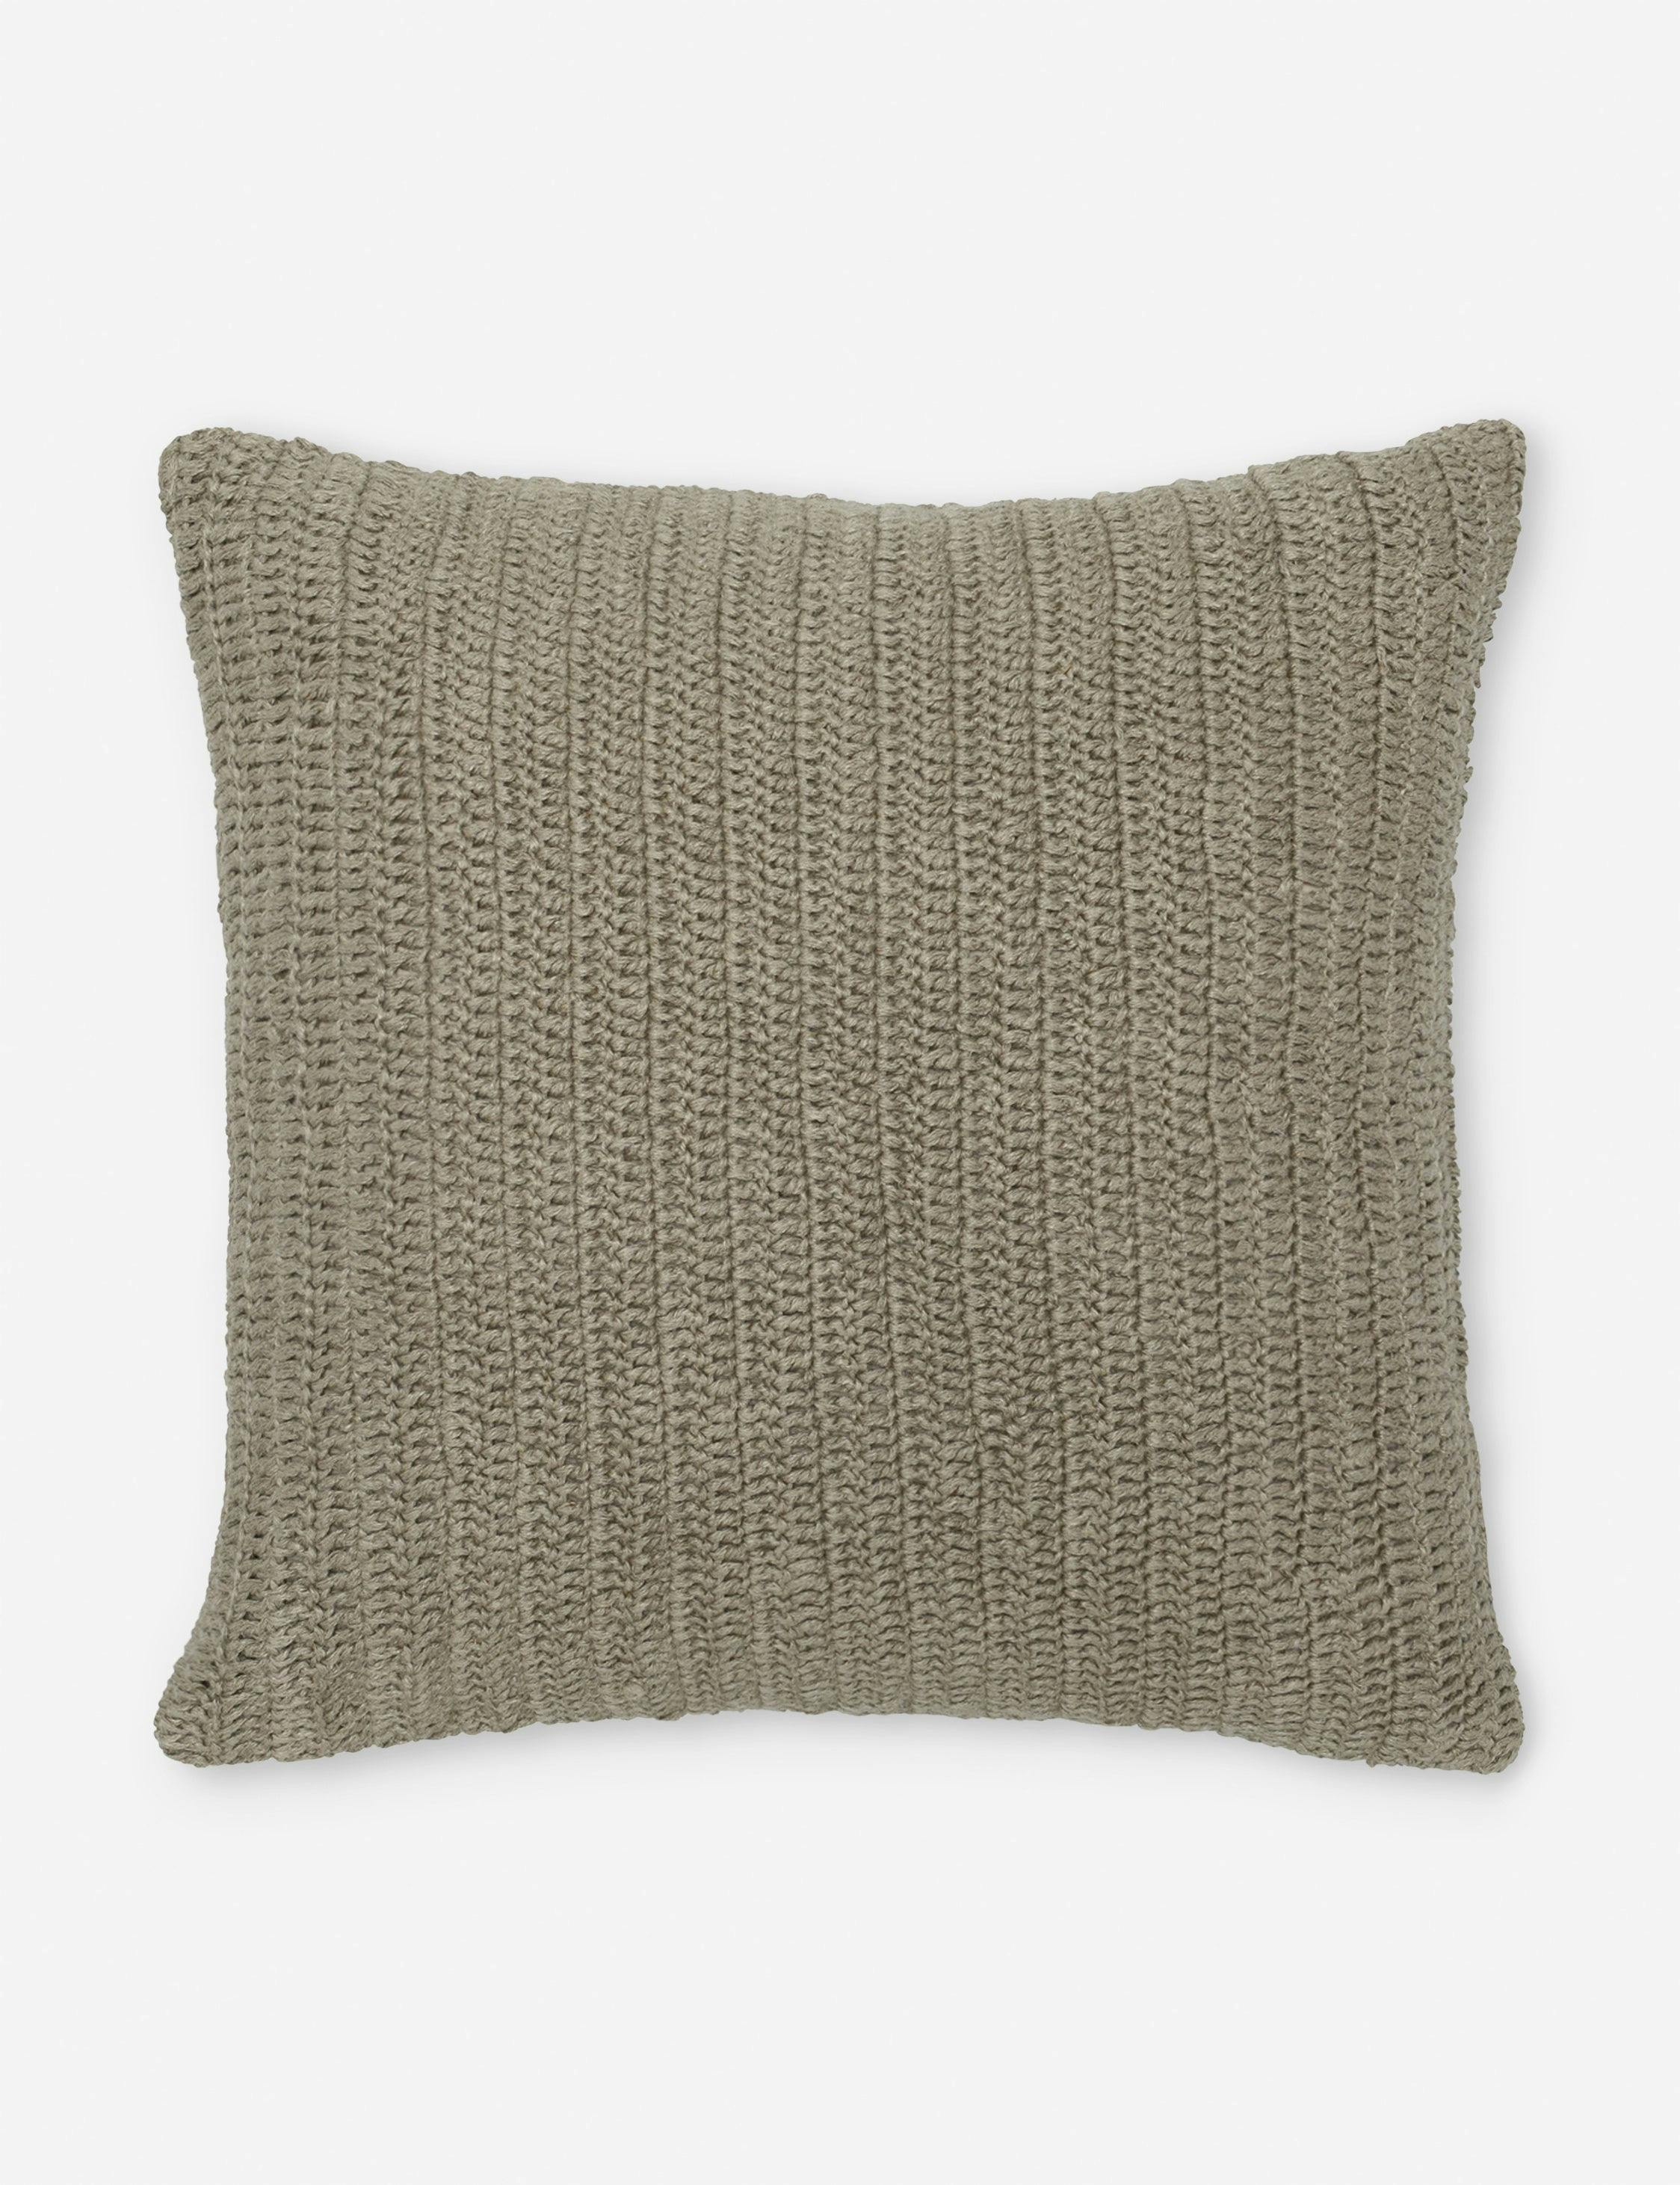 Artisanal Square Knitted Throw Pillow in Natural - 22" x 22"